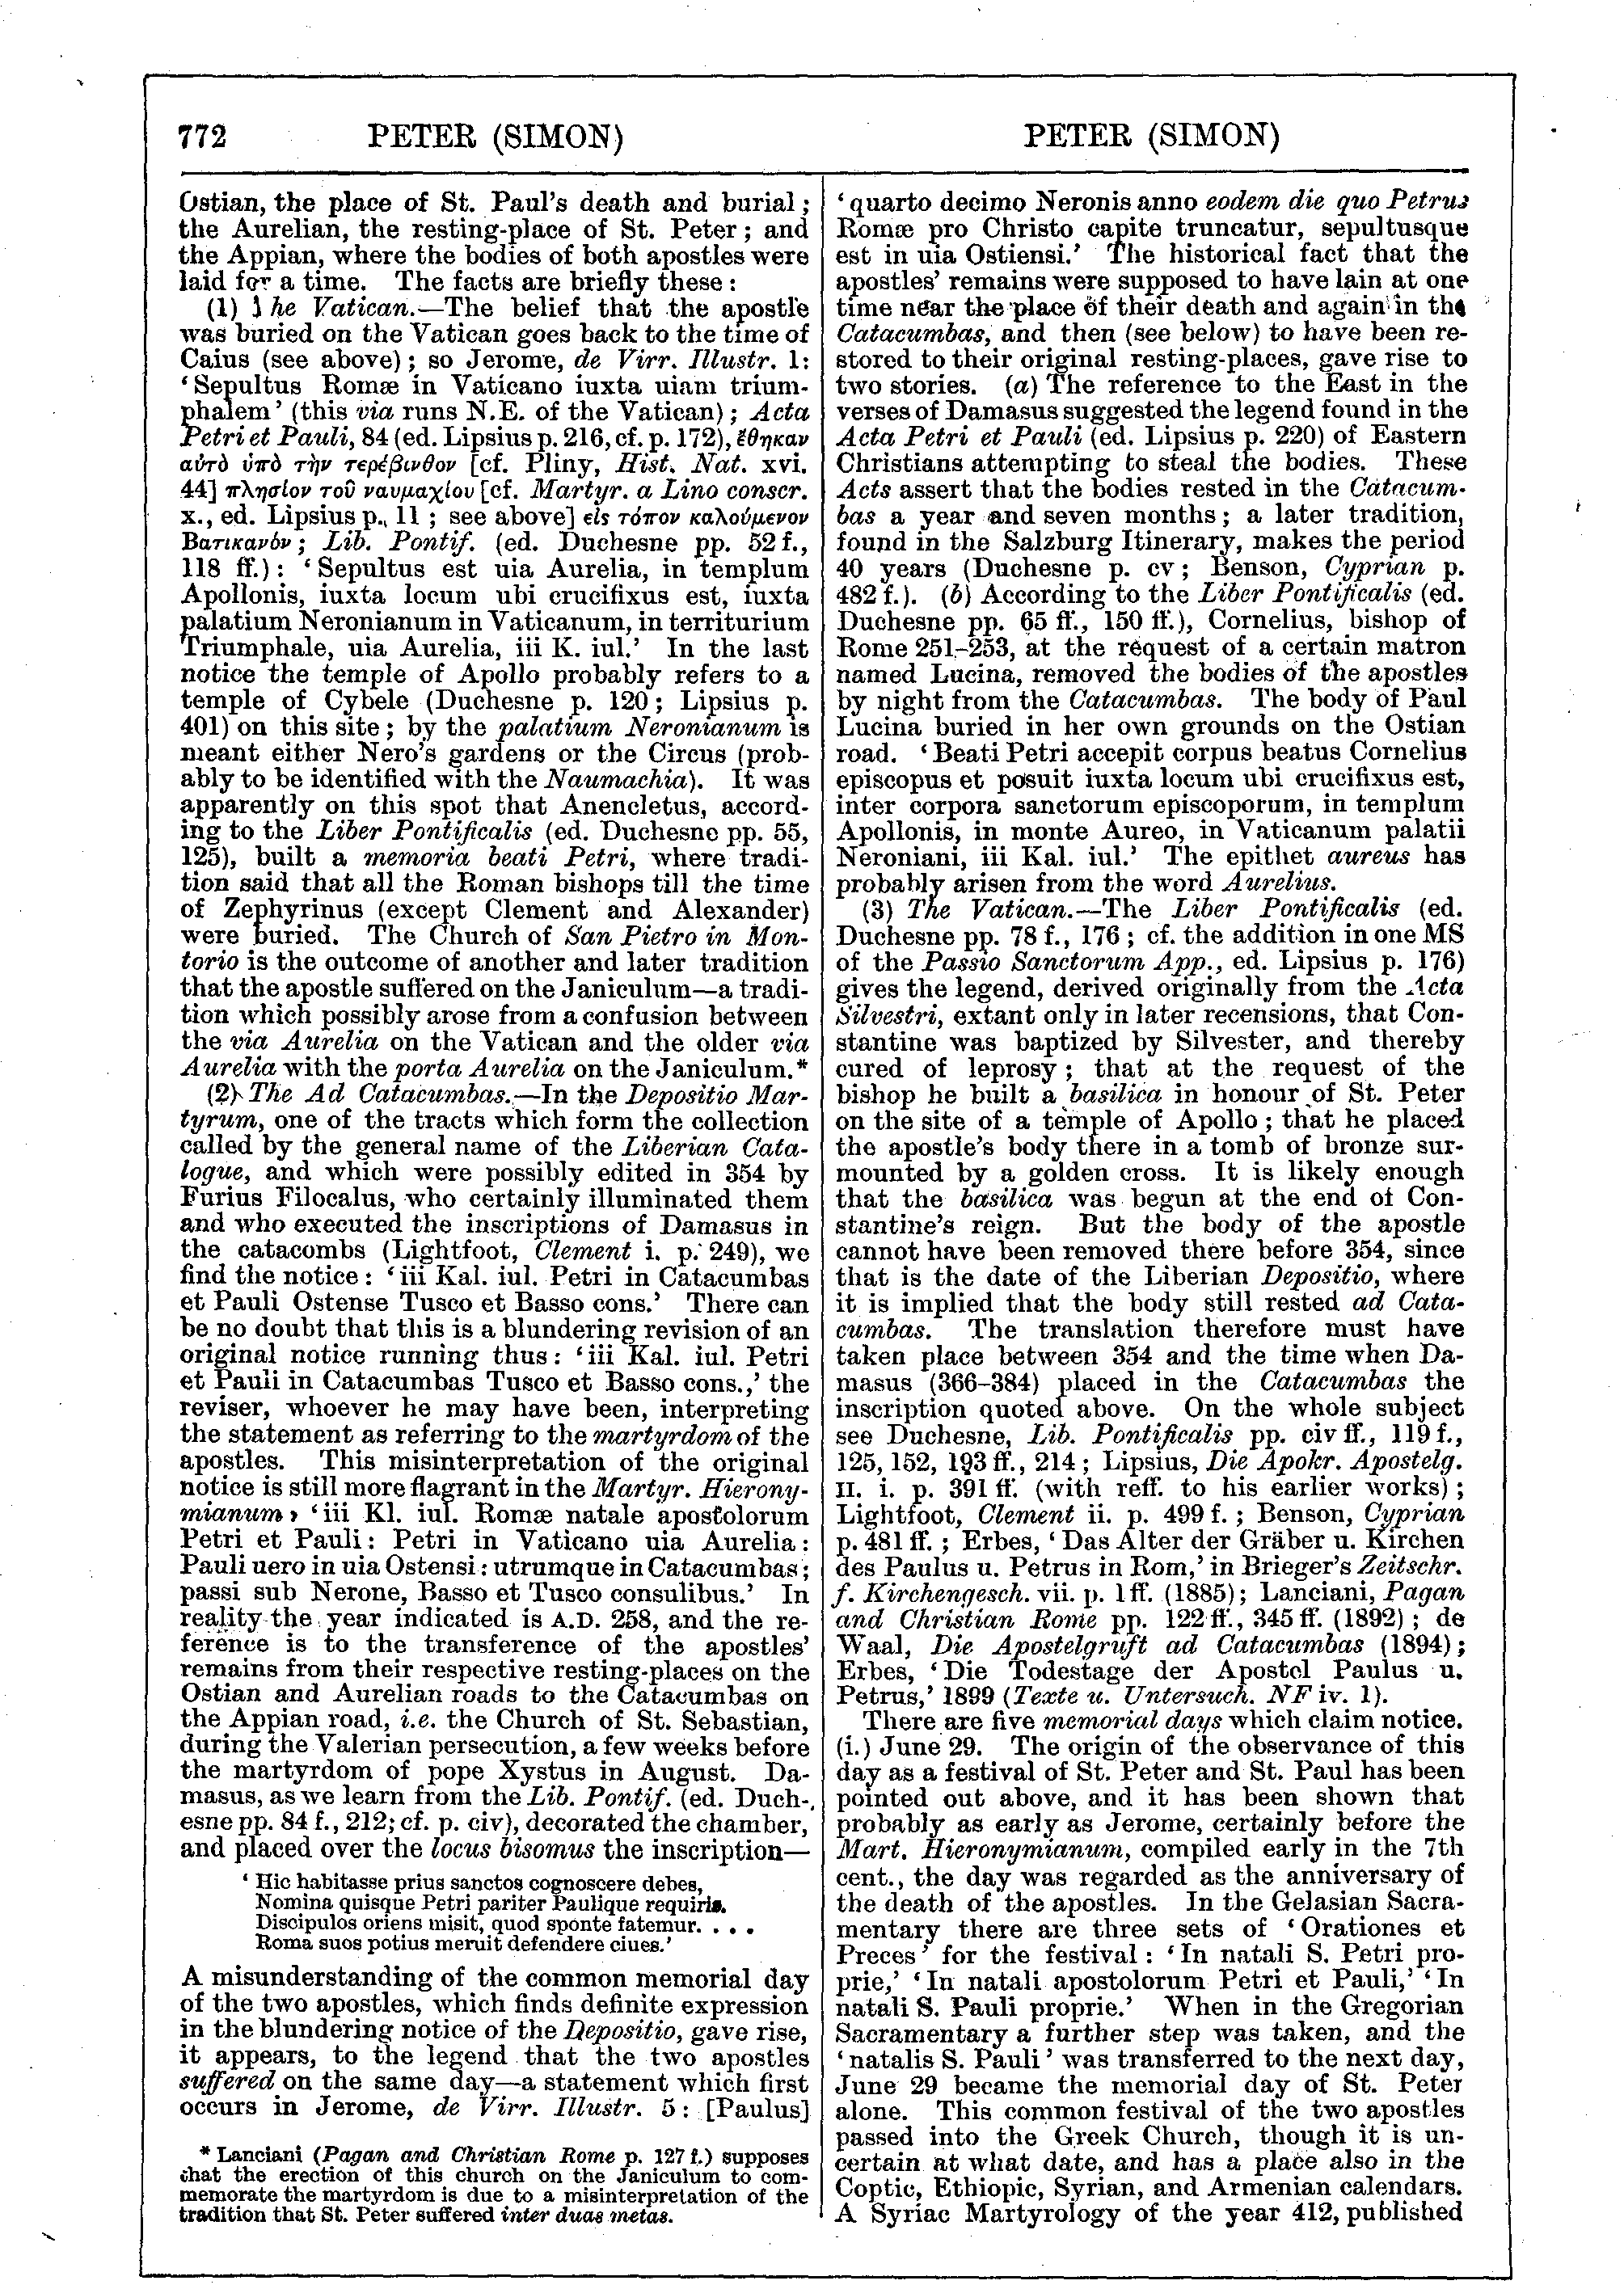 Image of page 772